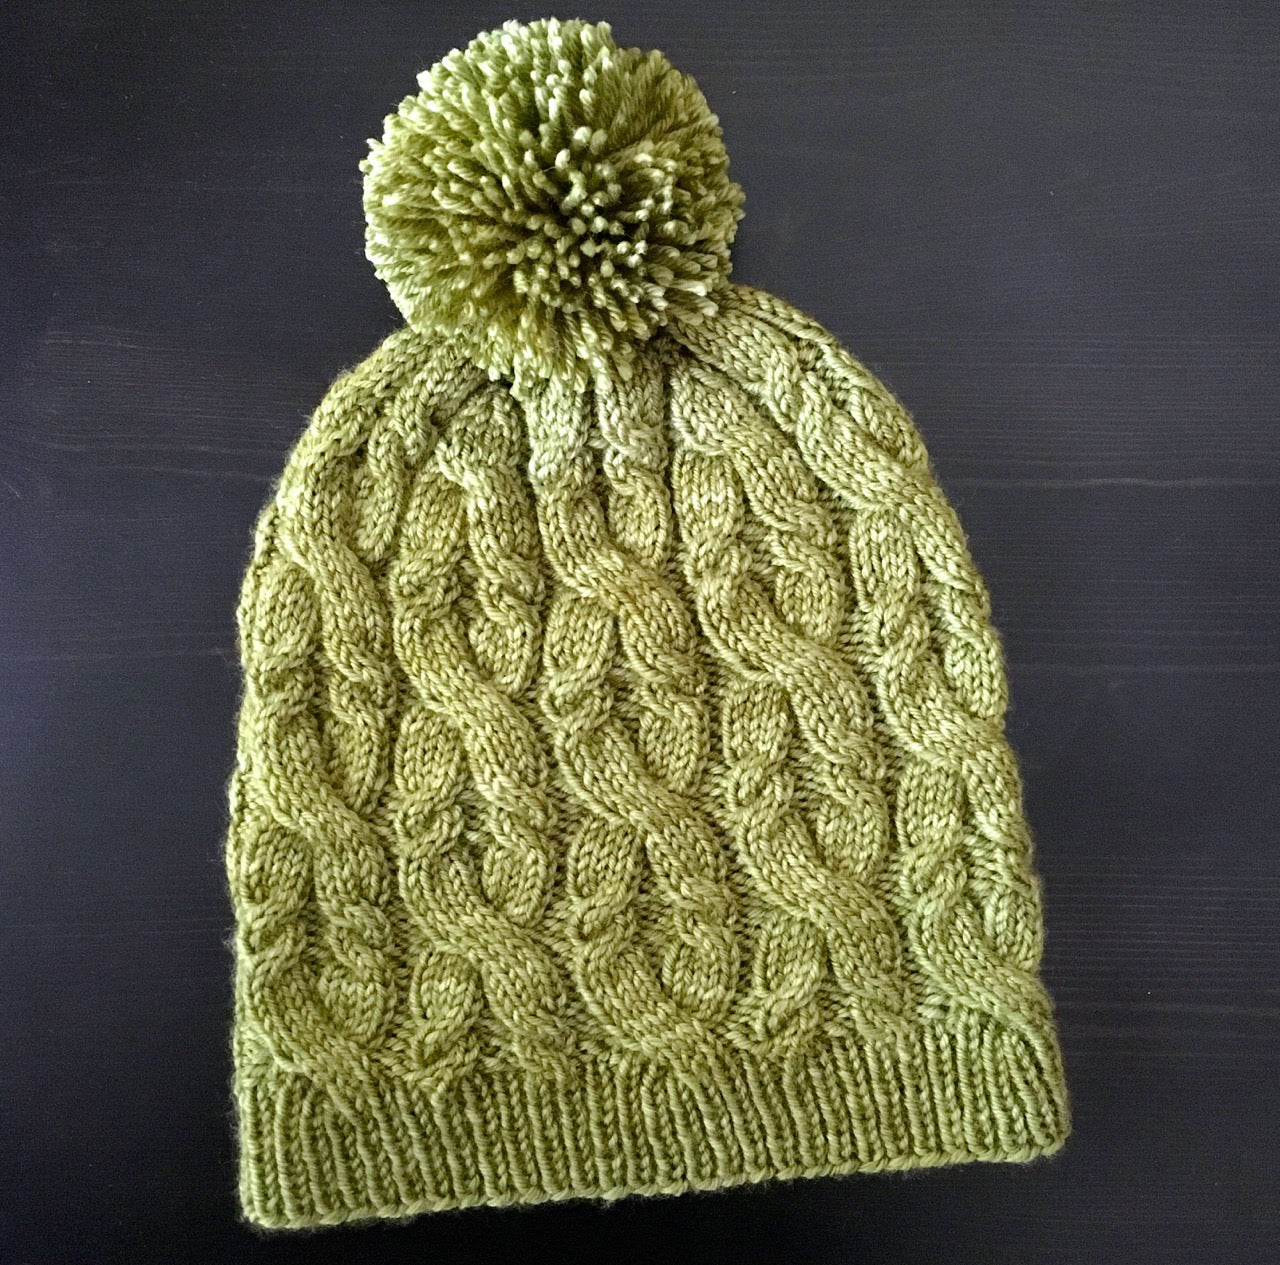 Sultana Cabled Hat - PDF Knitting Pattern